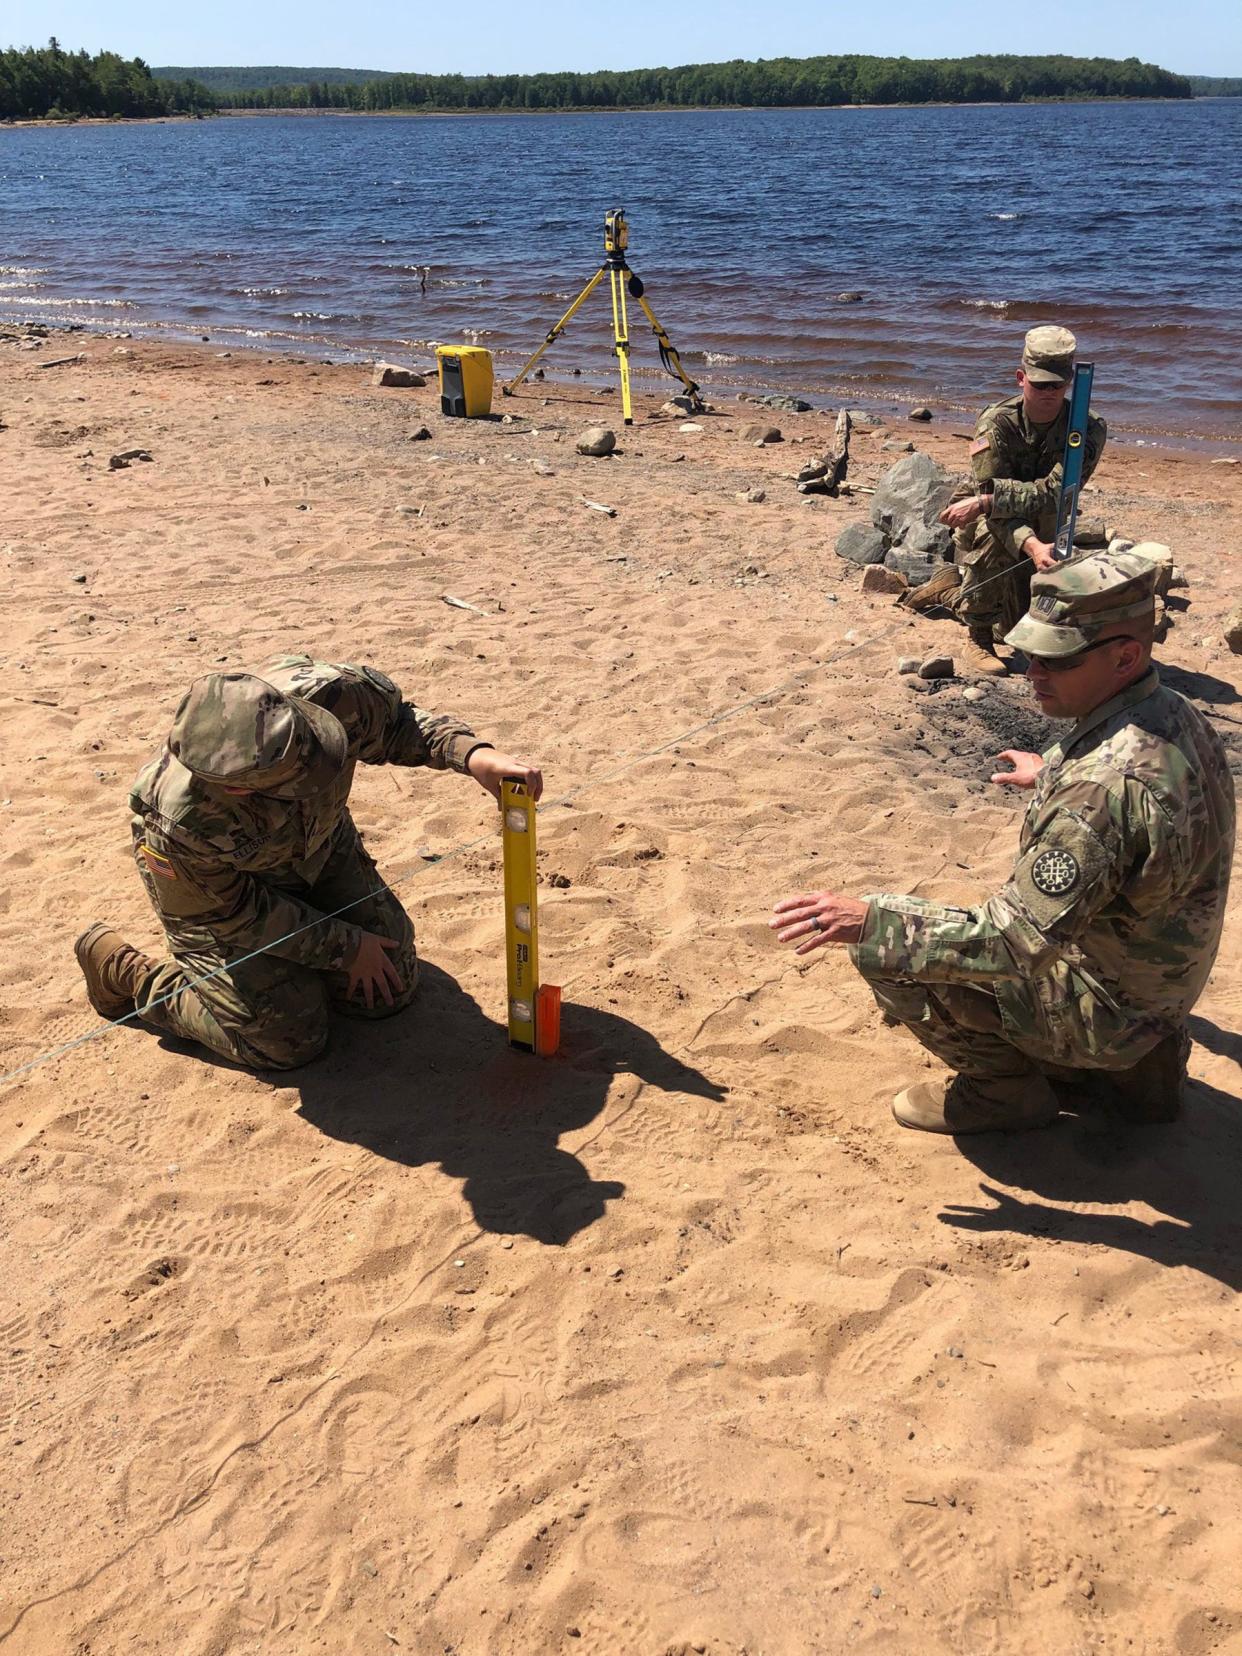 Members of the 1430th Engineer Vertical Construction Company, 107th Engineer Battalion will help repair infrastructure at Wilderness State Park May 3-13.